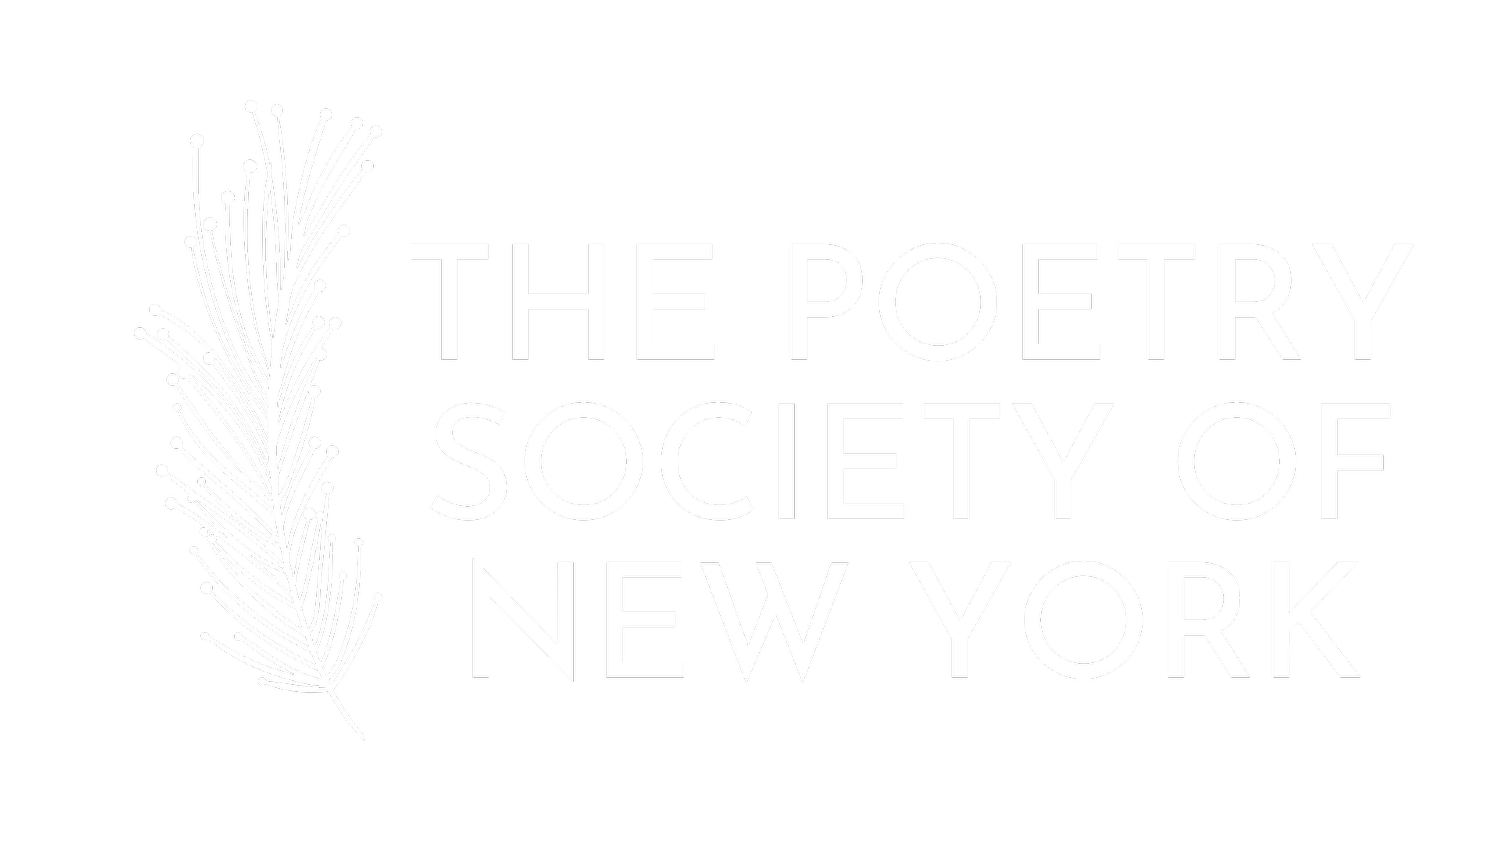 The Poetry Society of New York